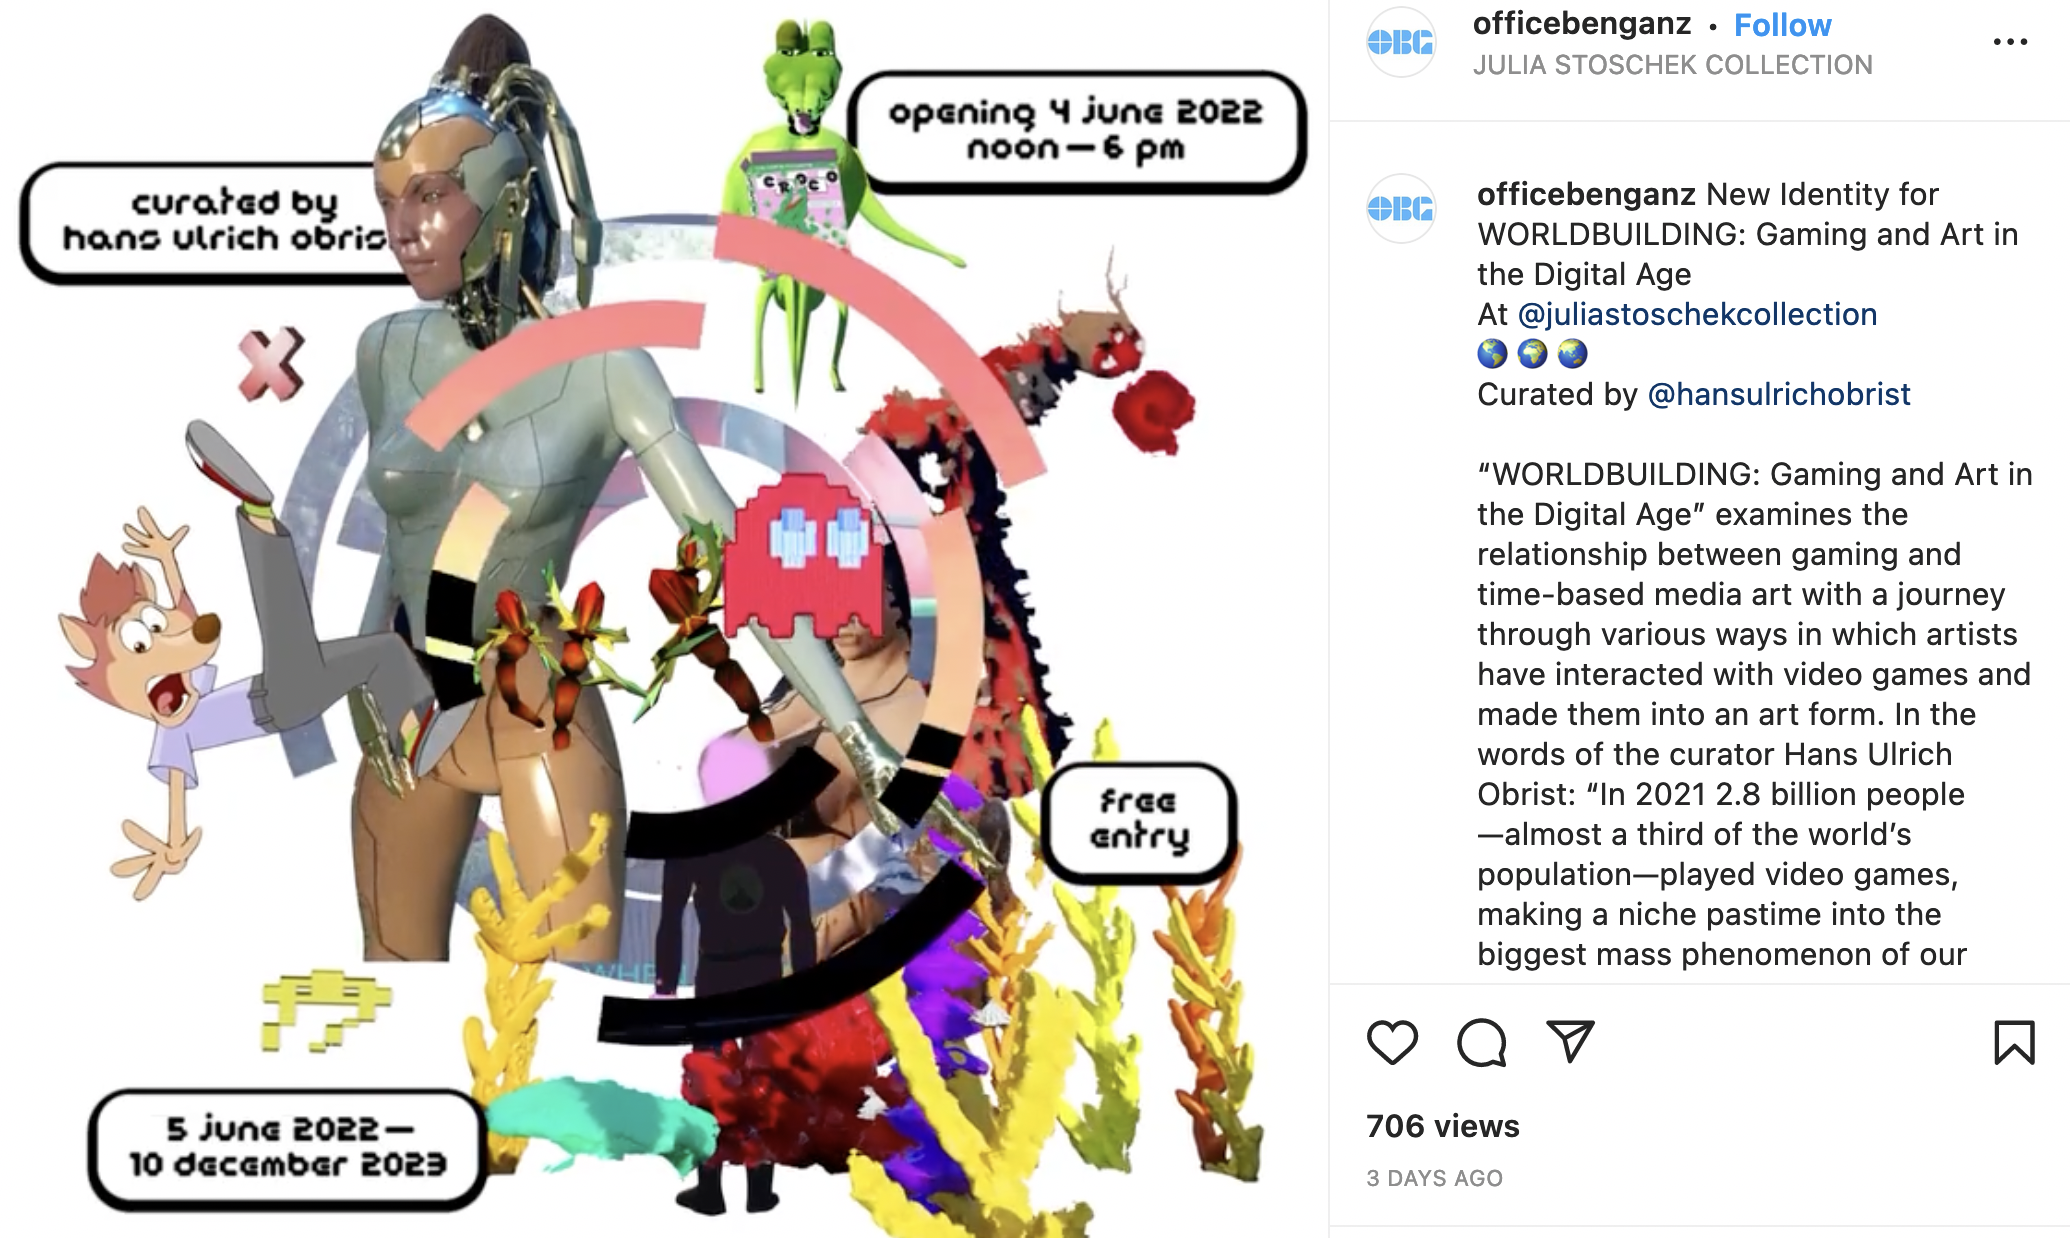 Ed’s Fox Persona, Lucifer, featured in the instagram post for New Identity for WORLDBUILDING: Gaming and Art in the Digital Age. Julia Stoschek Collection, curated by Hans Ulrich Obrist.